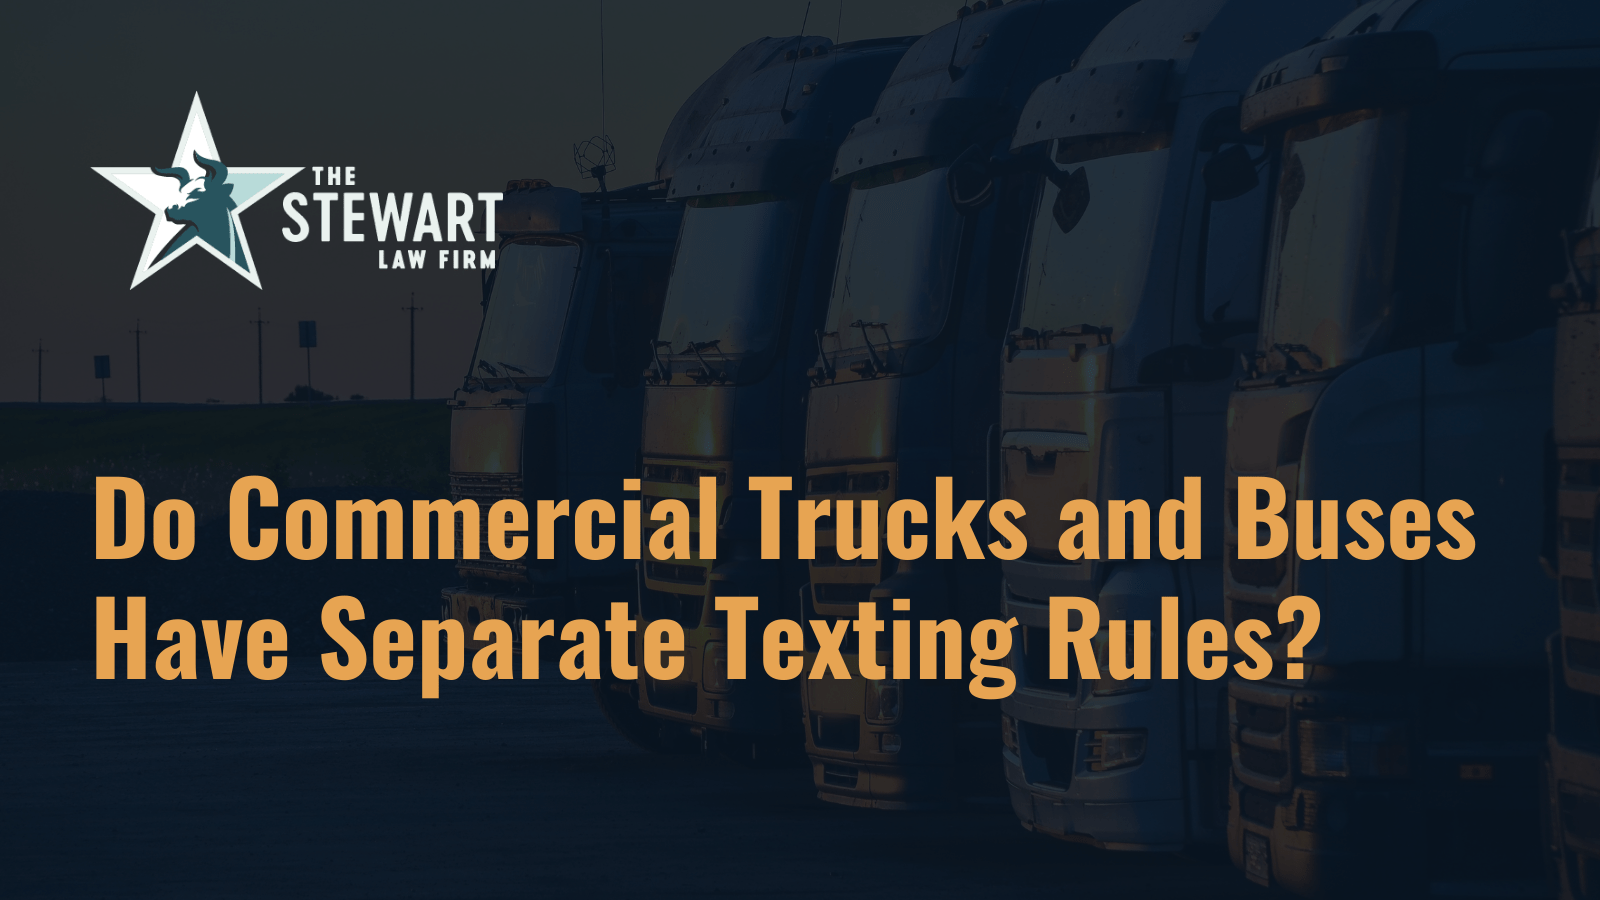 Do Commercial Trucks and Buses Have Separate Texting Rules - the stewart law firm - austin texas personal injury lawyer